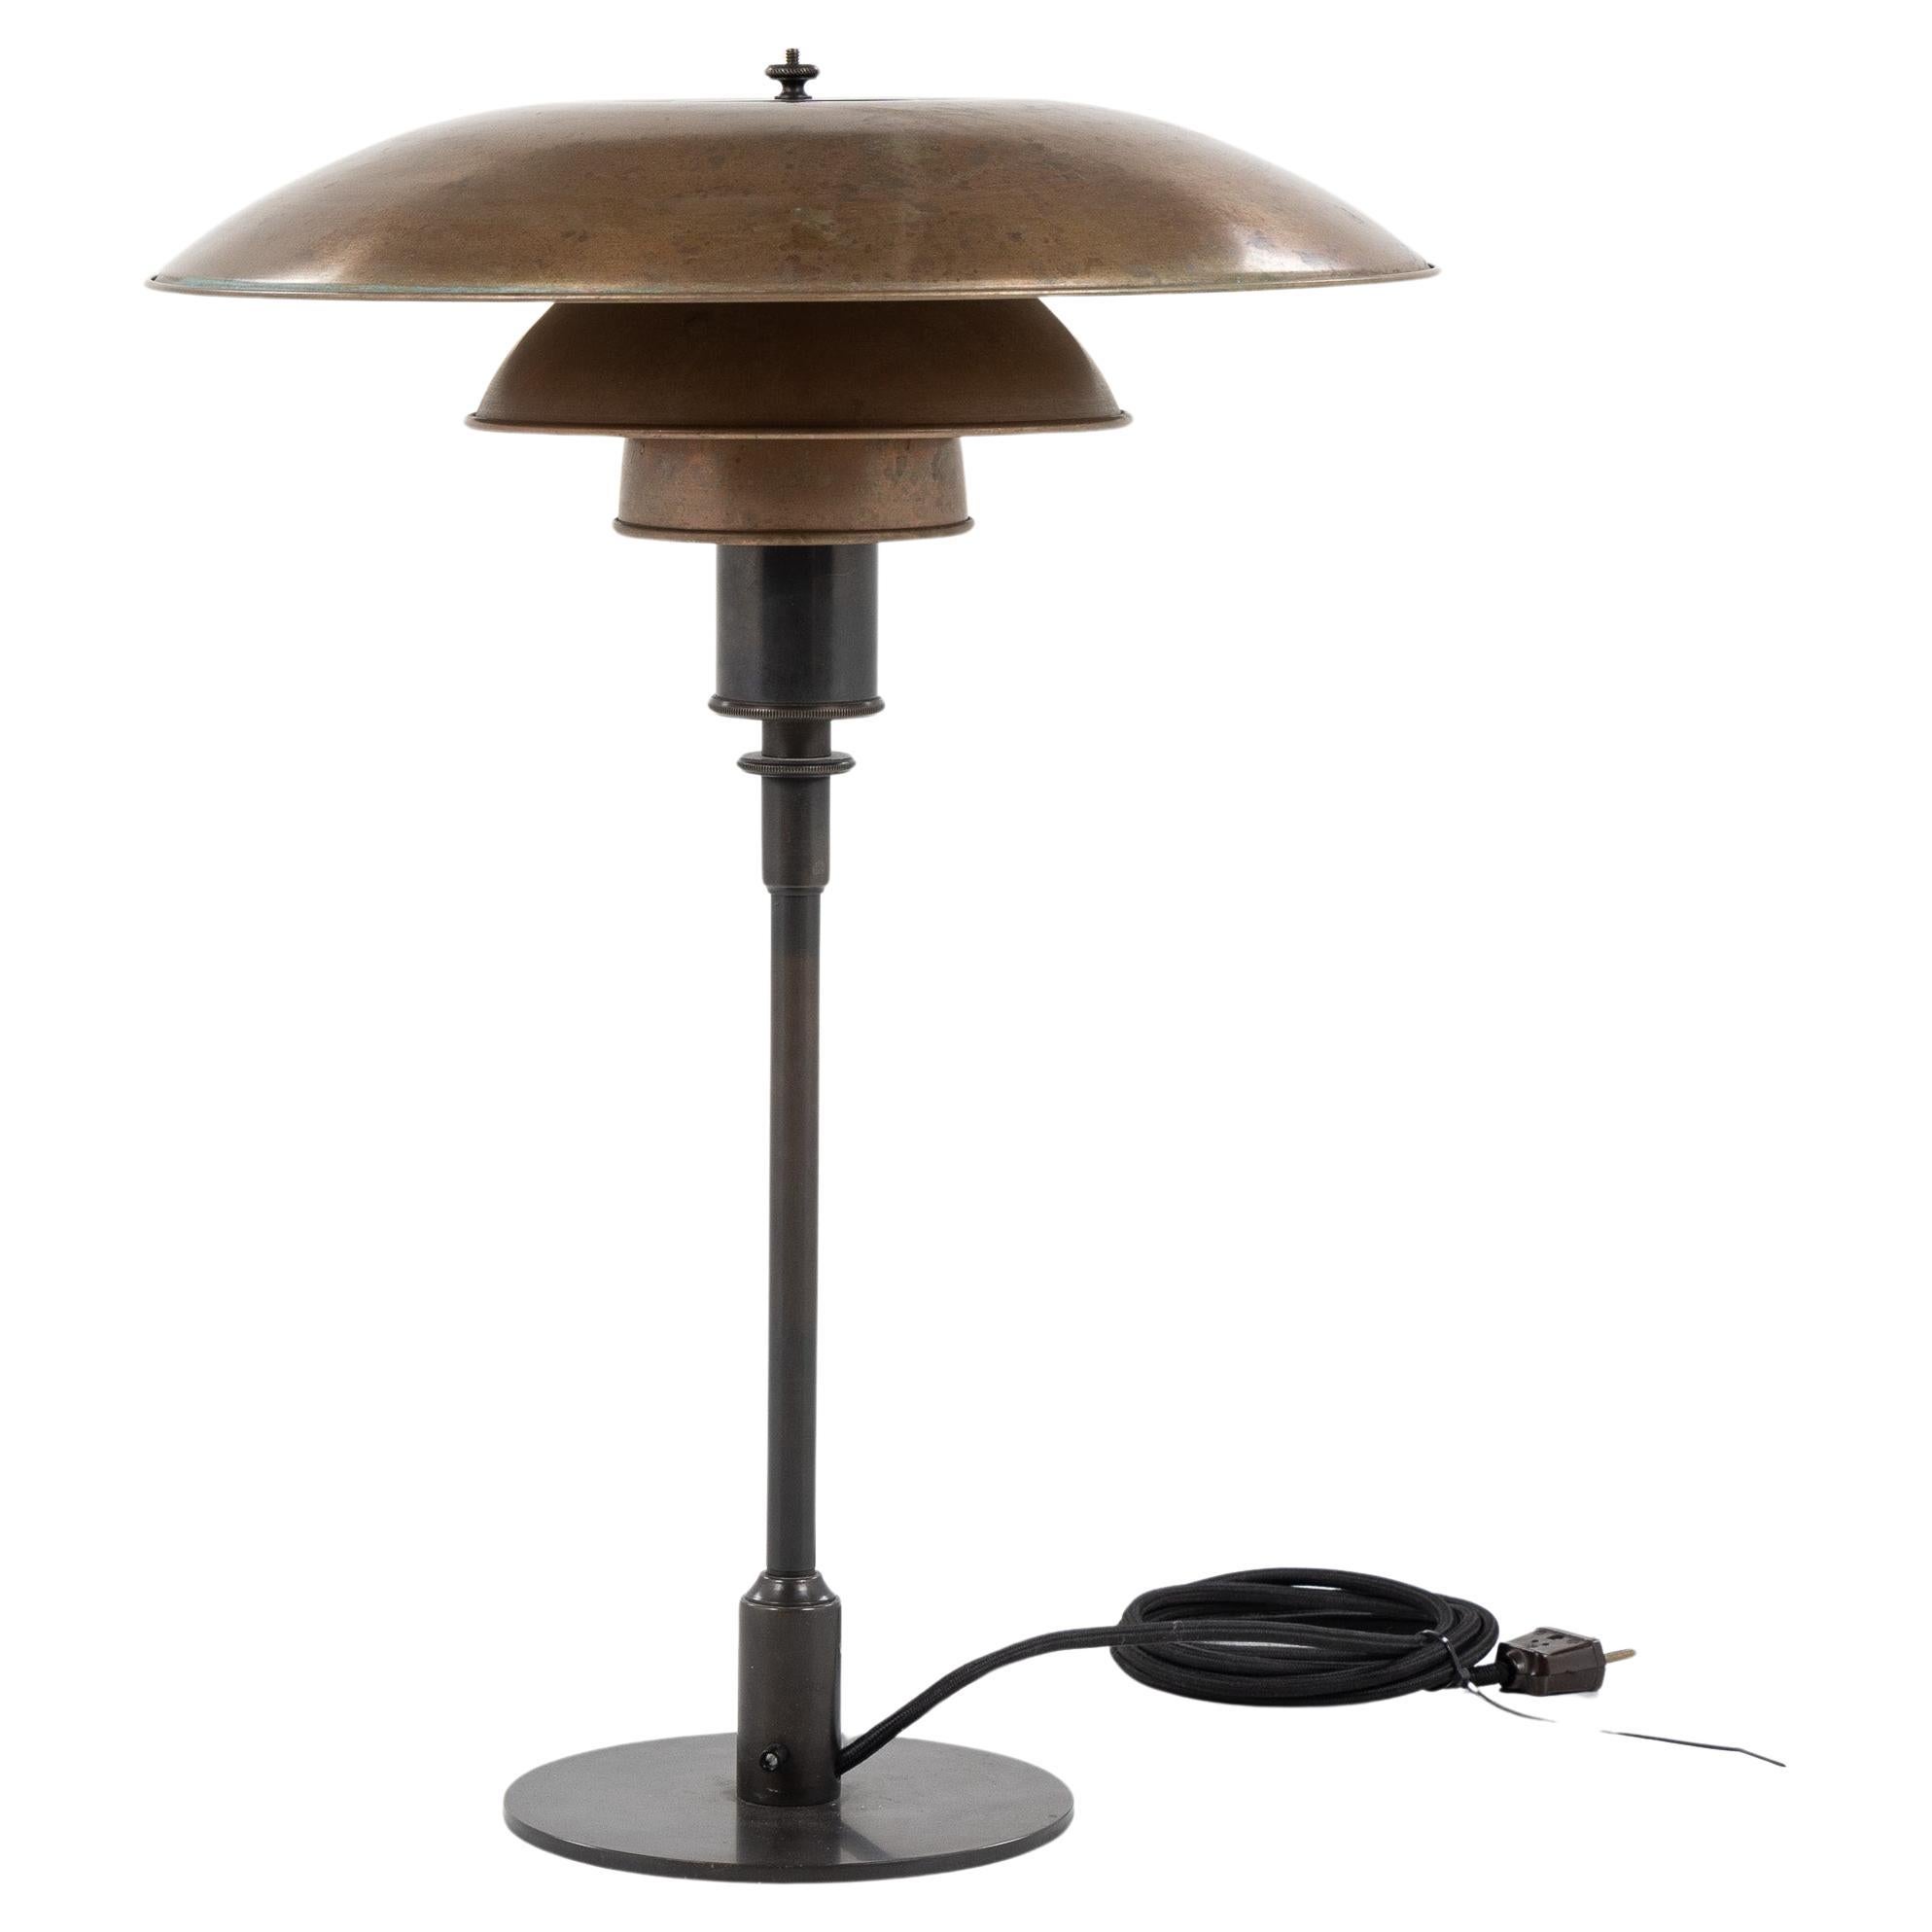 PH 4/3 - Copper table lamp by Poul Henningsen, 1930's